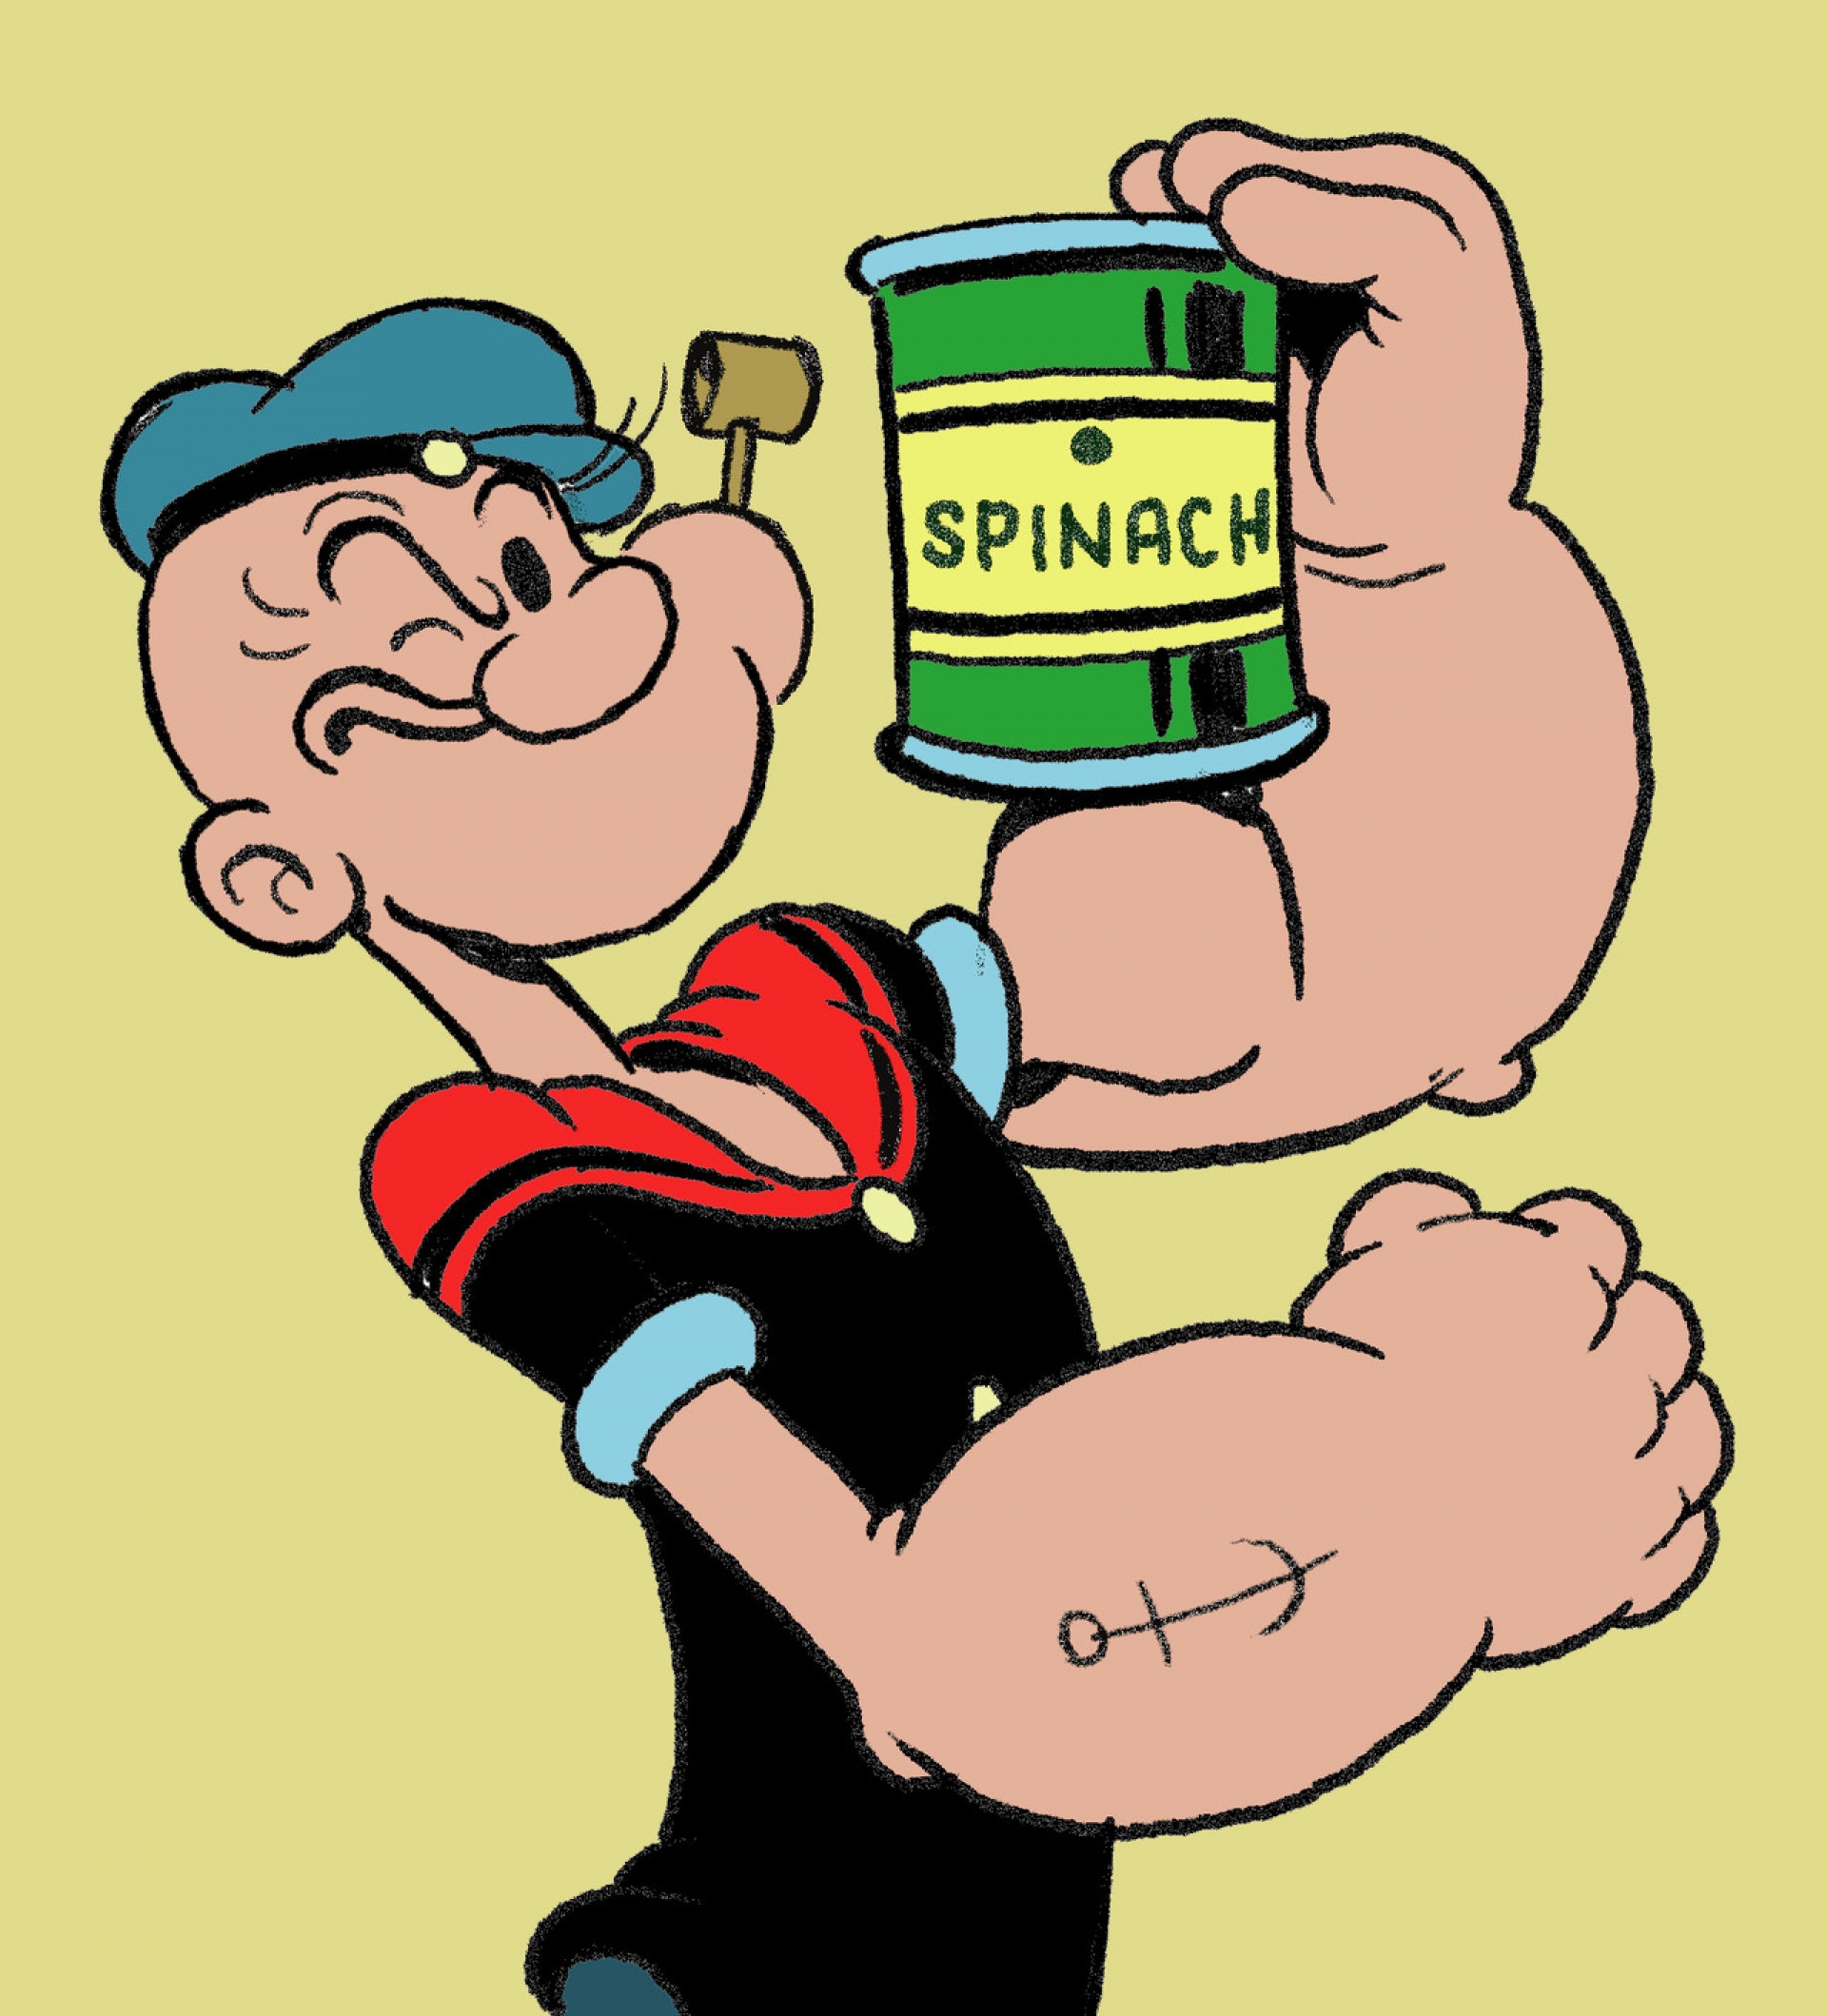 National spinach day